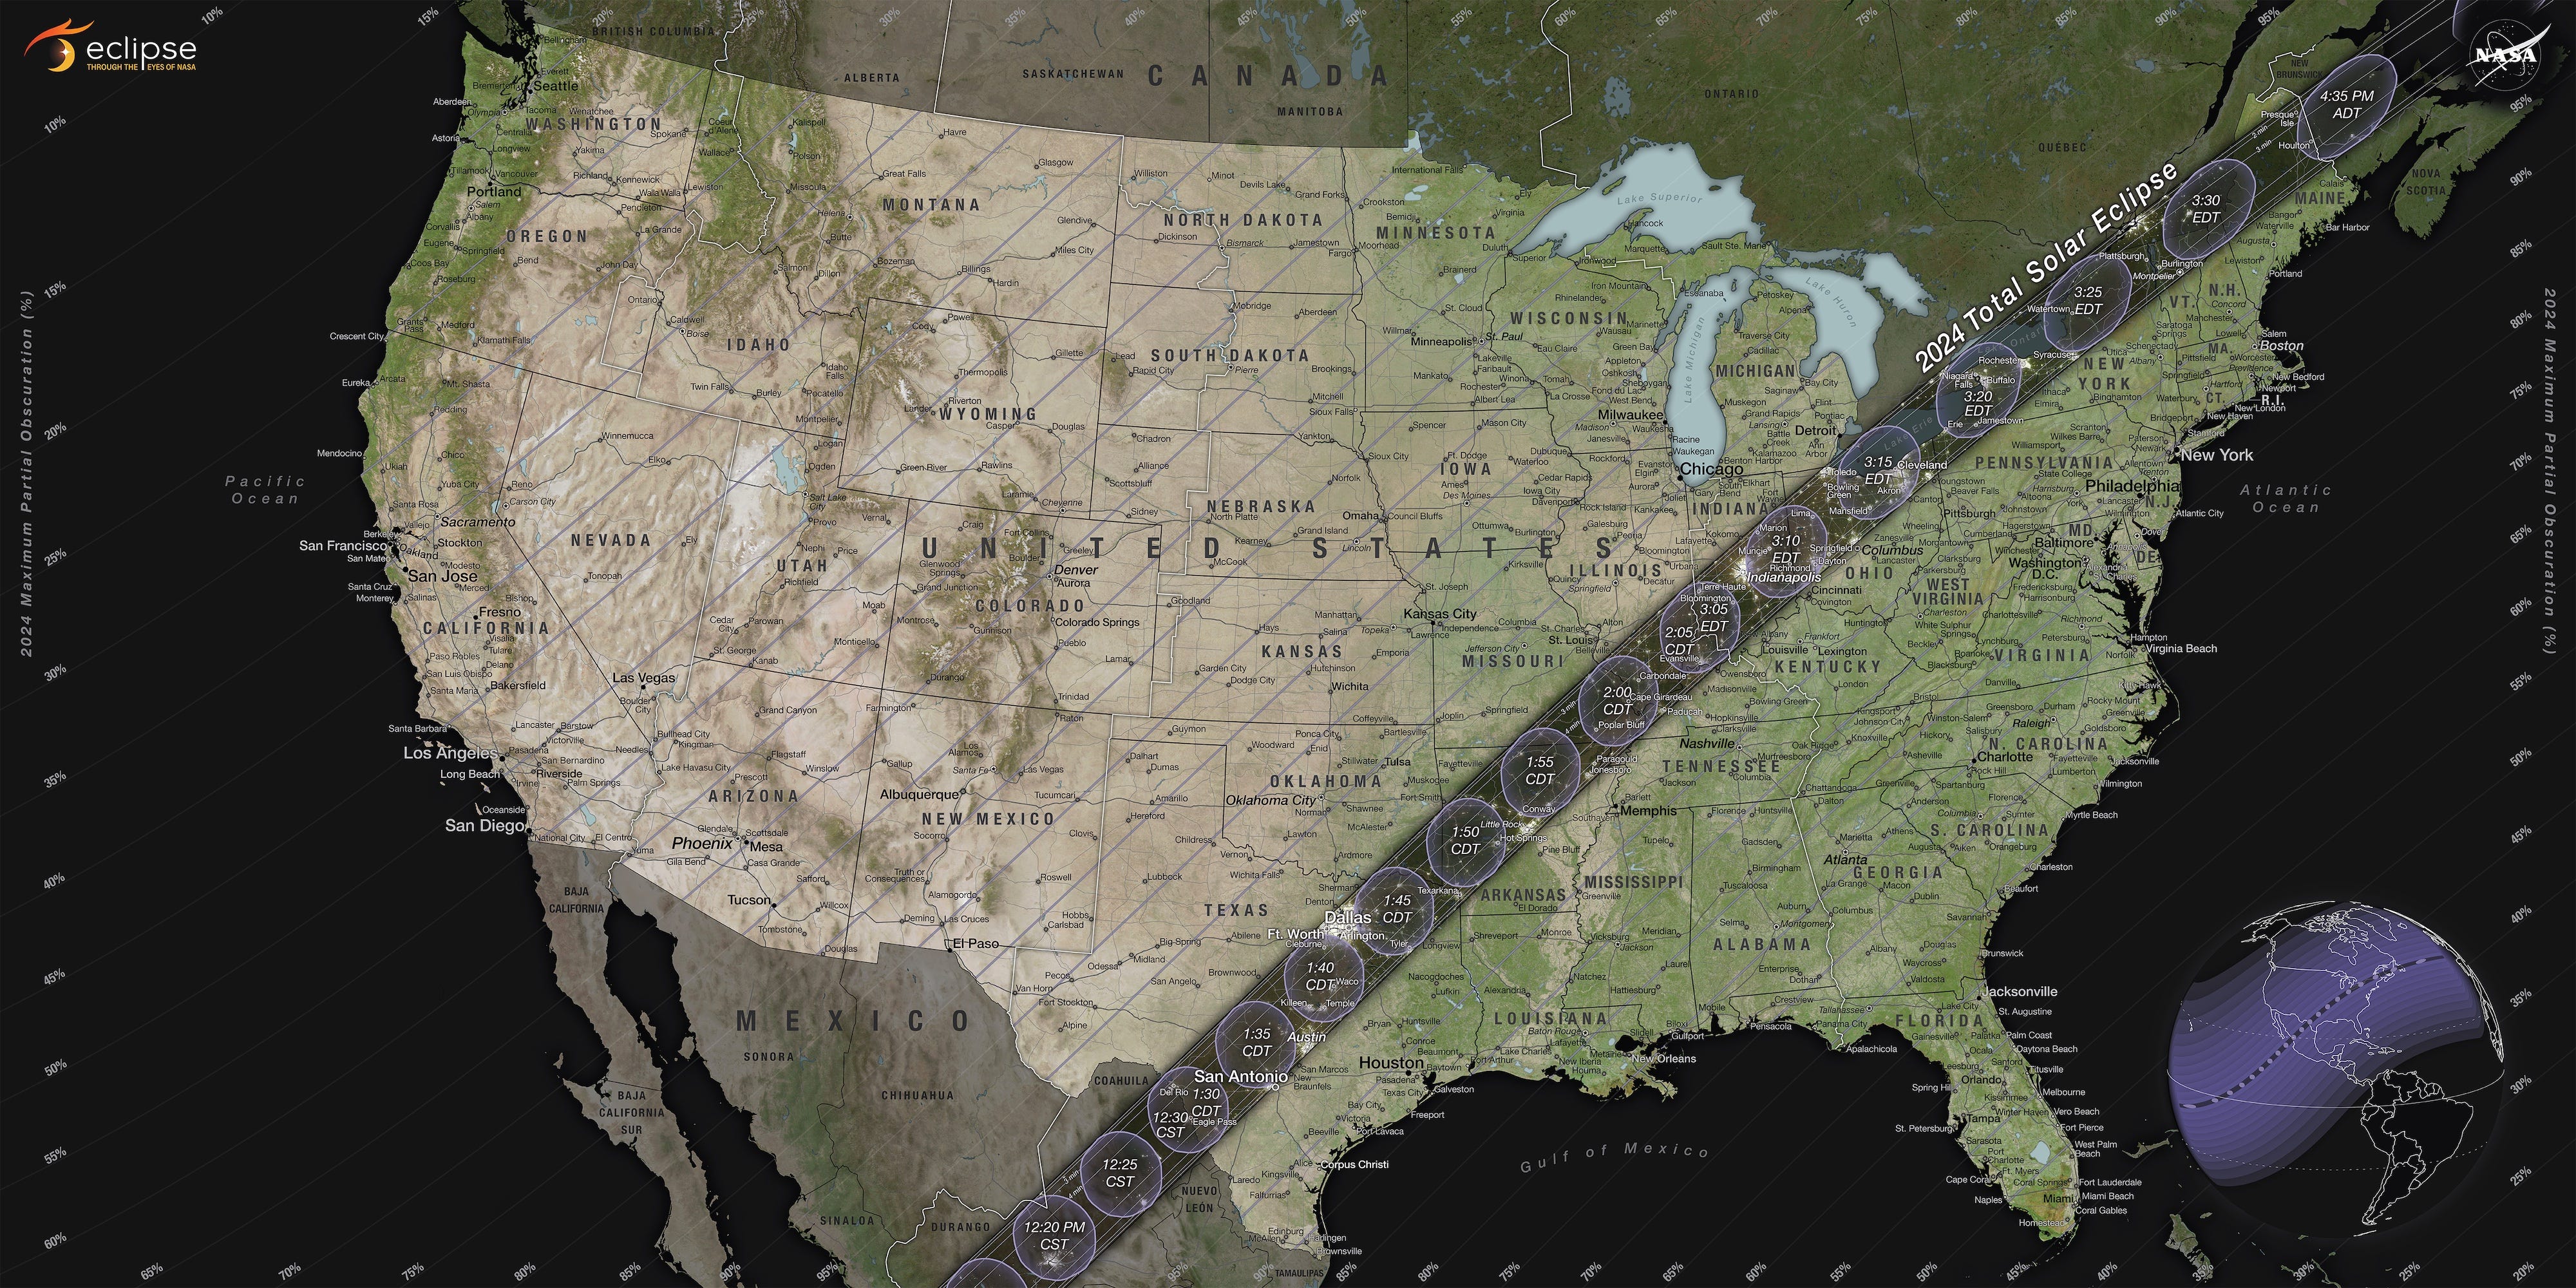 <p>NASA made this detailed map showing the <a href="https://www.businessinsider.com/great-american-total-solar-eclipse-where-view-see-cities-visible-2024-2">path of totality</a> for the April 8 total solar eclipse.</p>